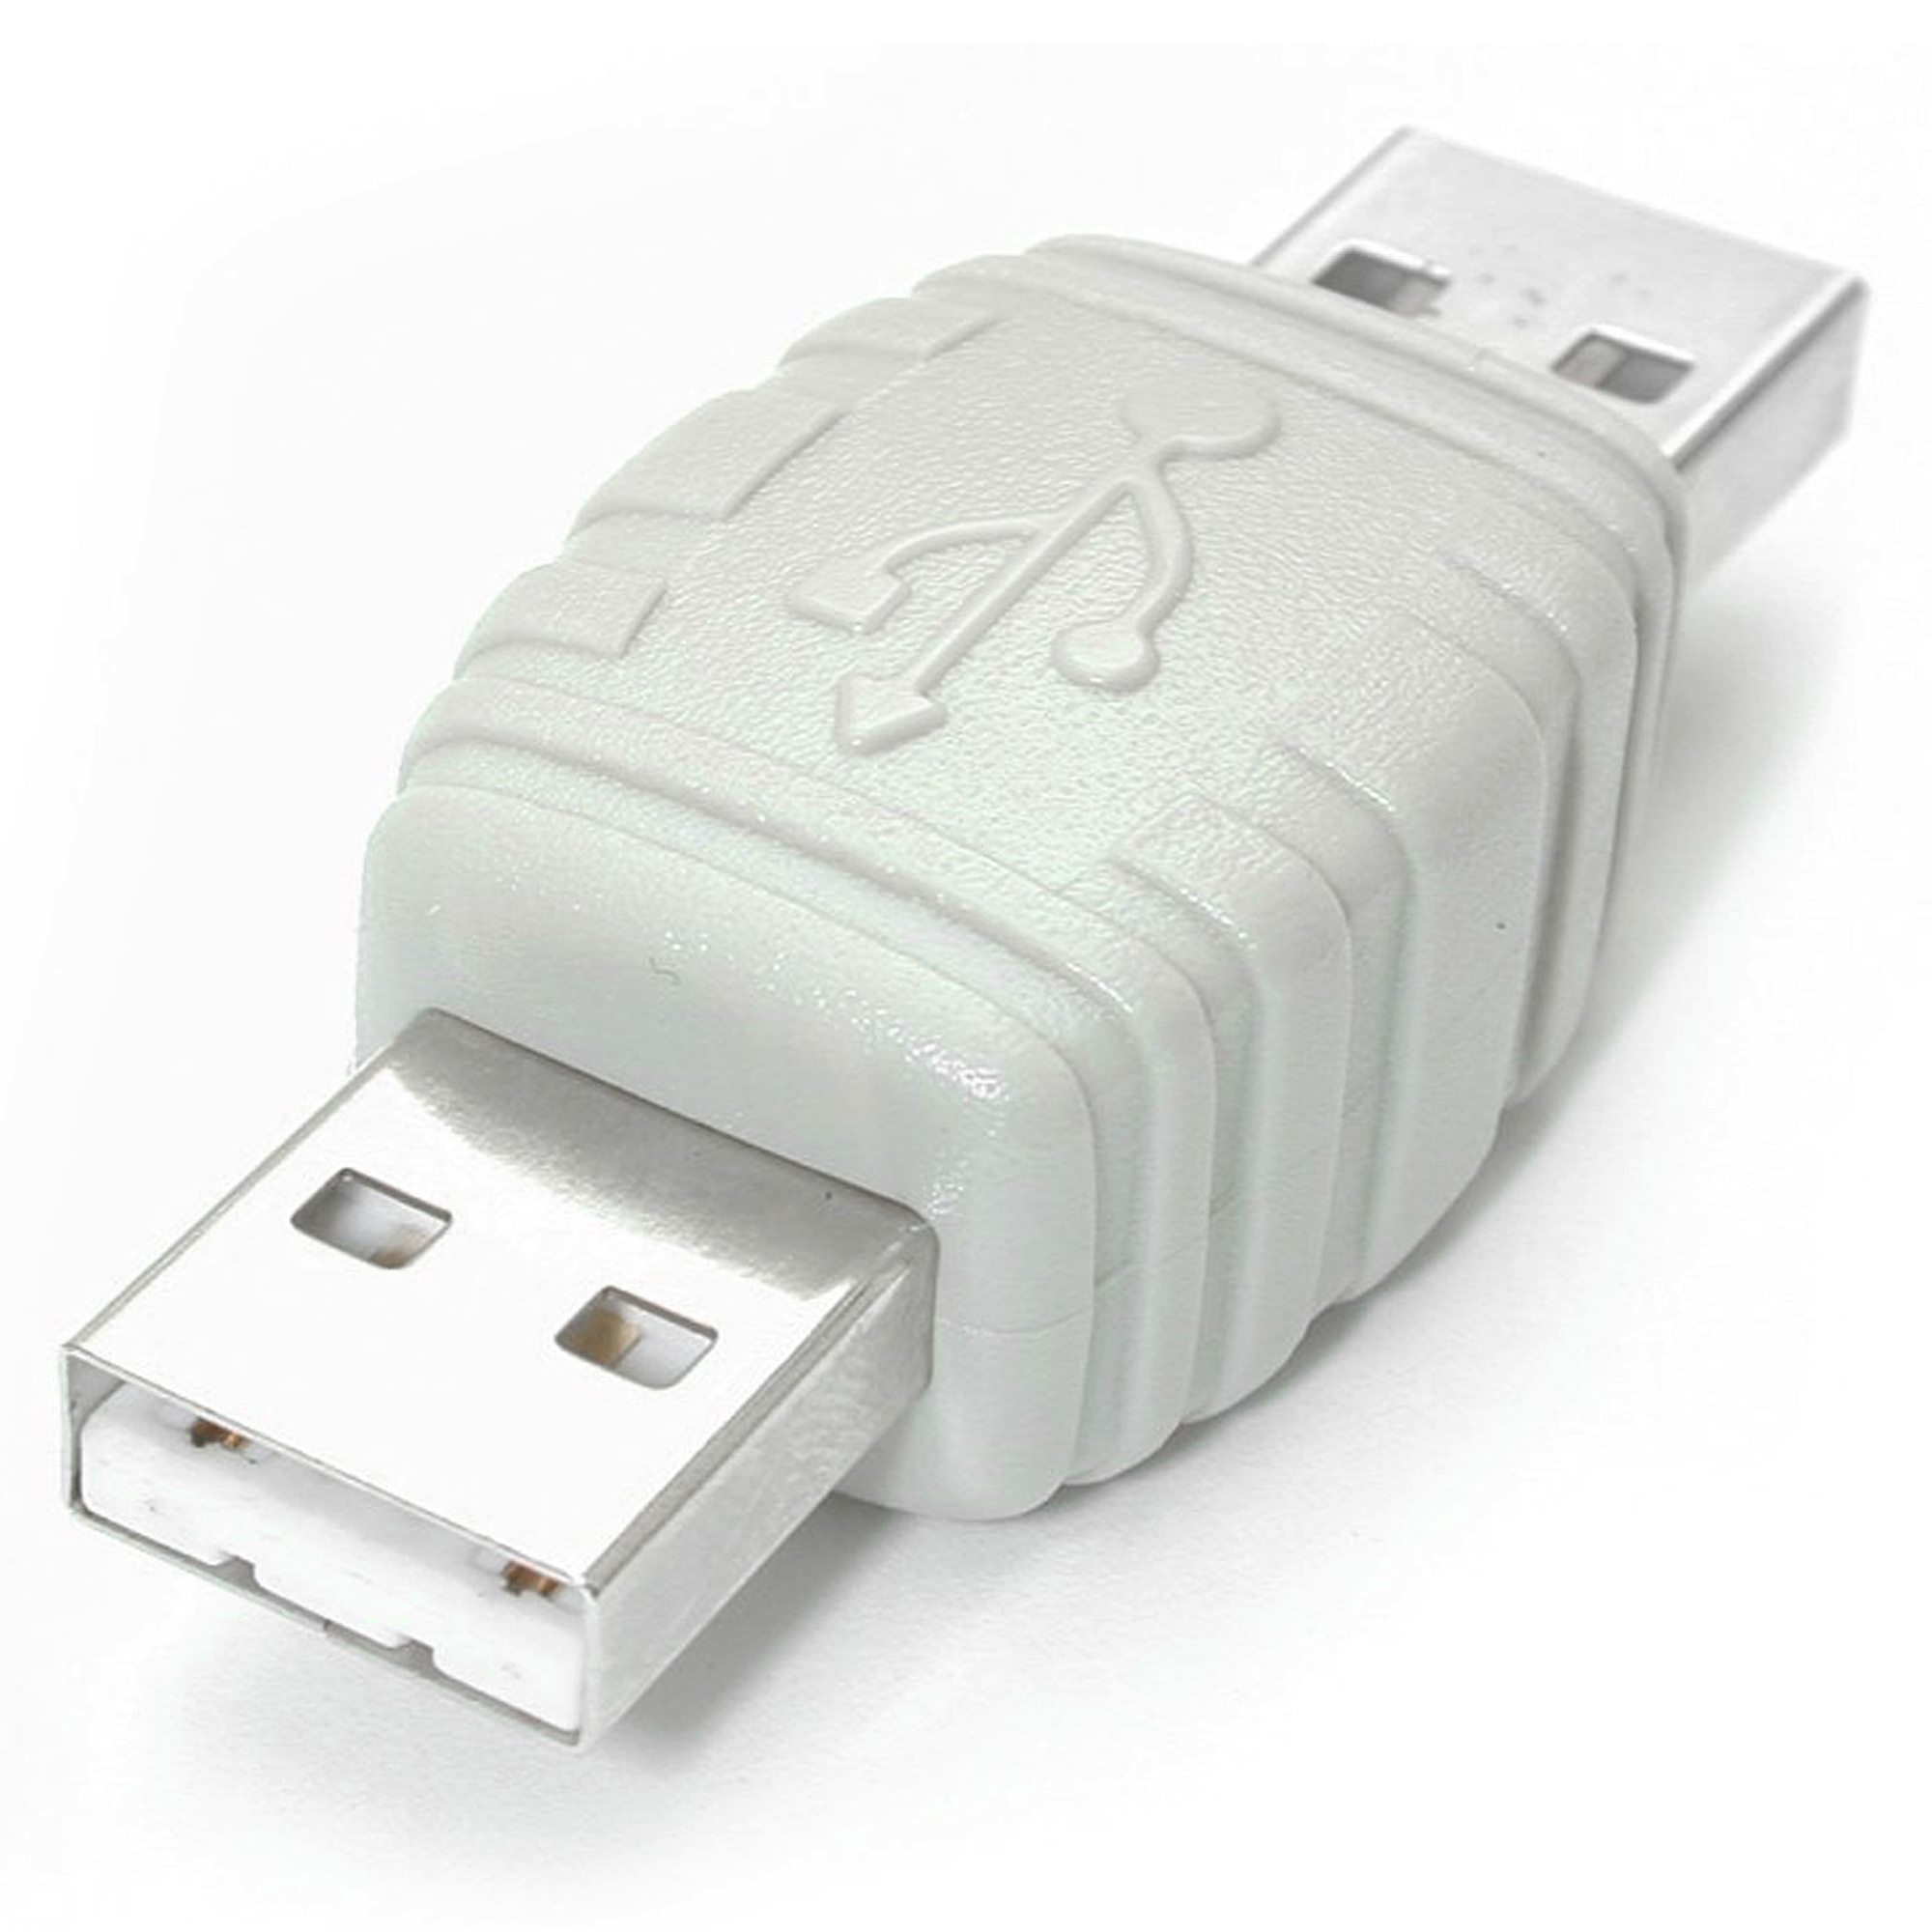 Bloesem zien bewondering USB A to USB A Cable Adapter M/M - USB Adapters (USB 2.0) | StarTech.com